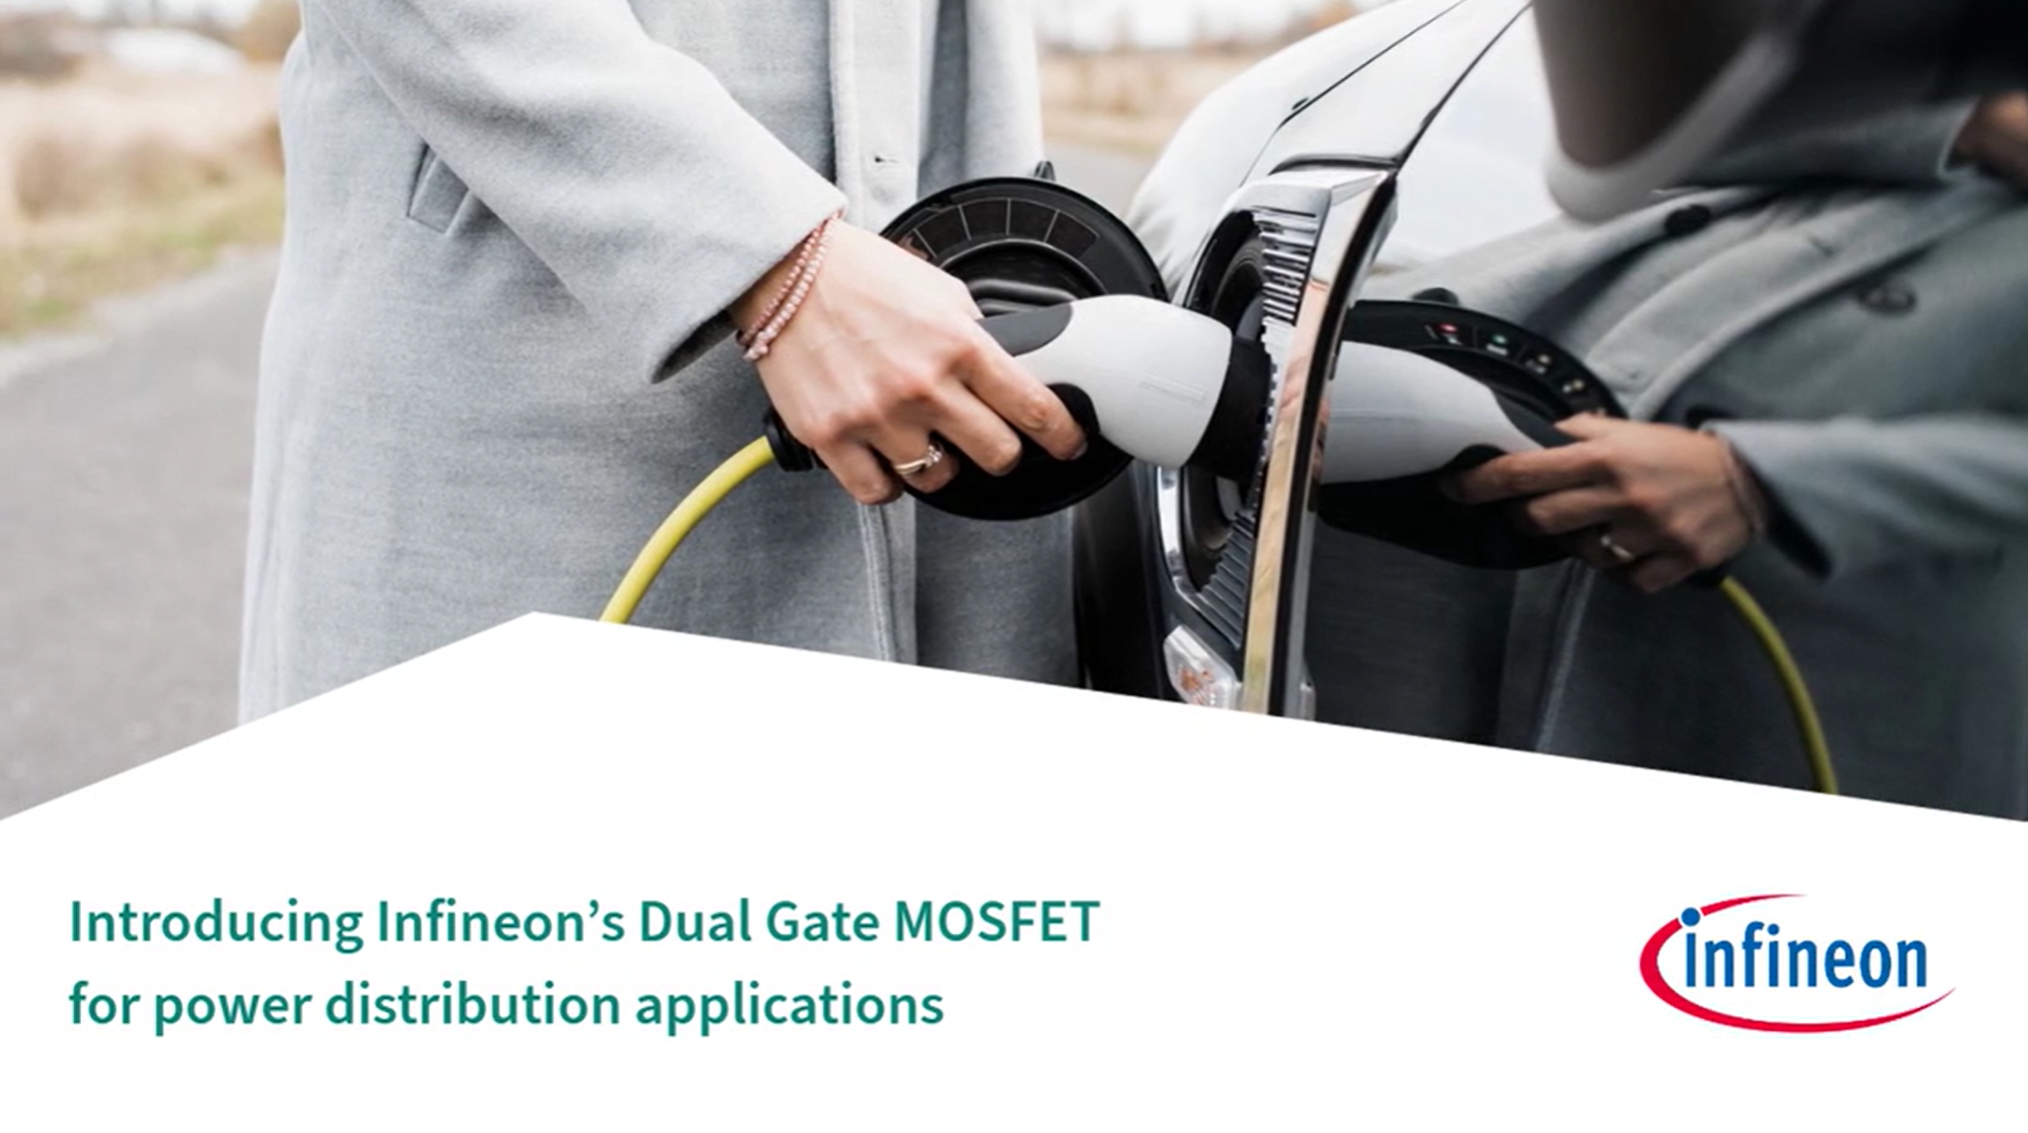 Introducing Infineon’s Dual Gate MOSFET for power distribution applications